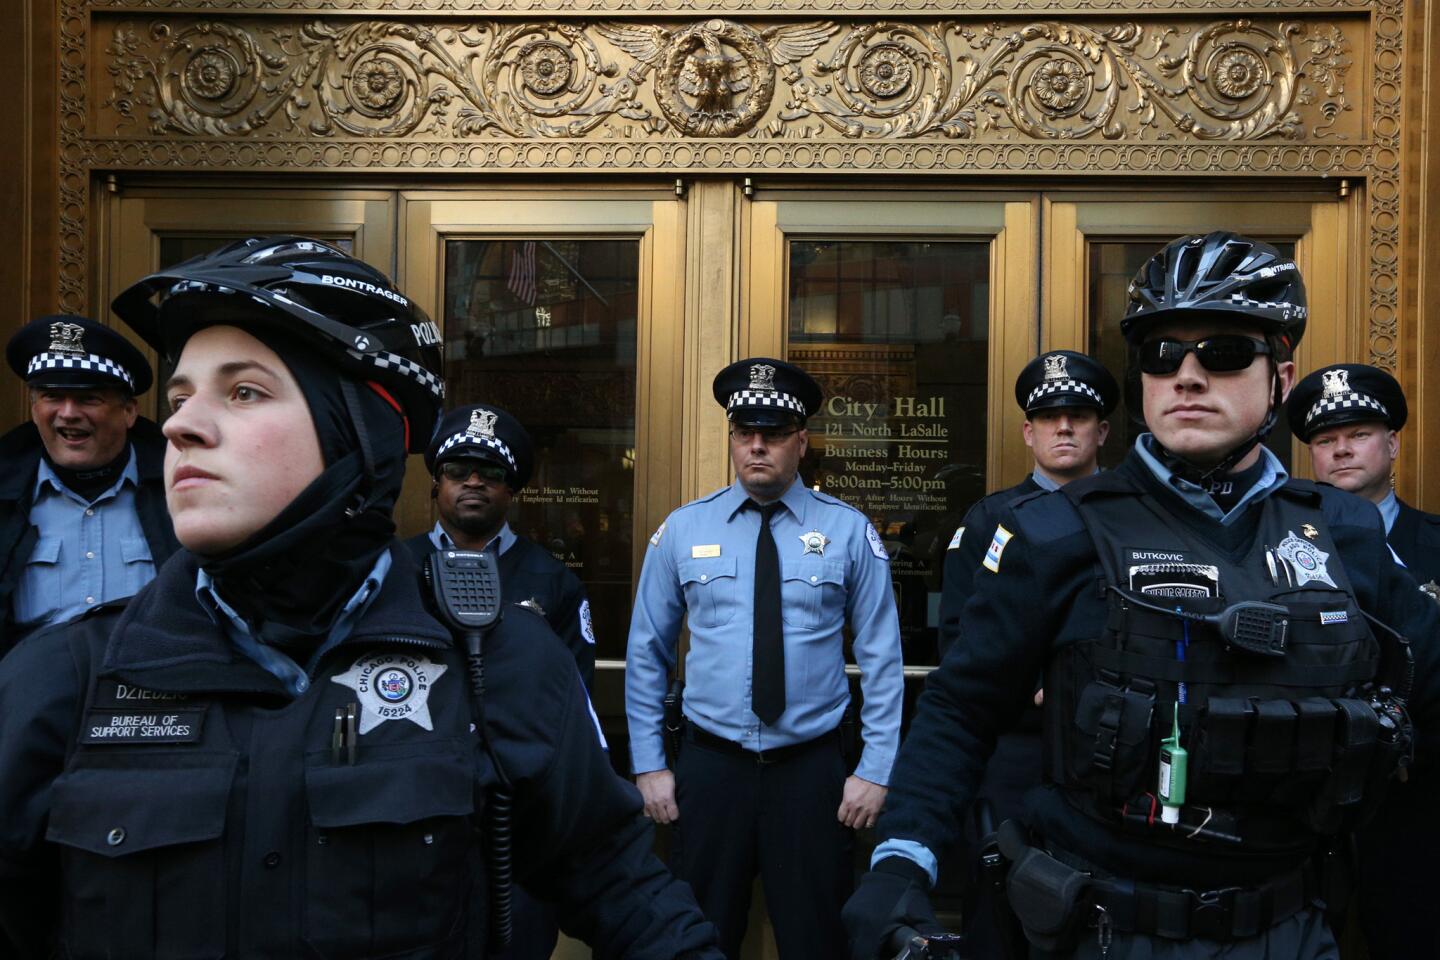 Chicago police officers block entry to City Hall during a march on Dec. 9, 2015, calling for Mayor Rahm Emanuel to resign.